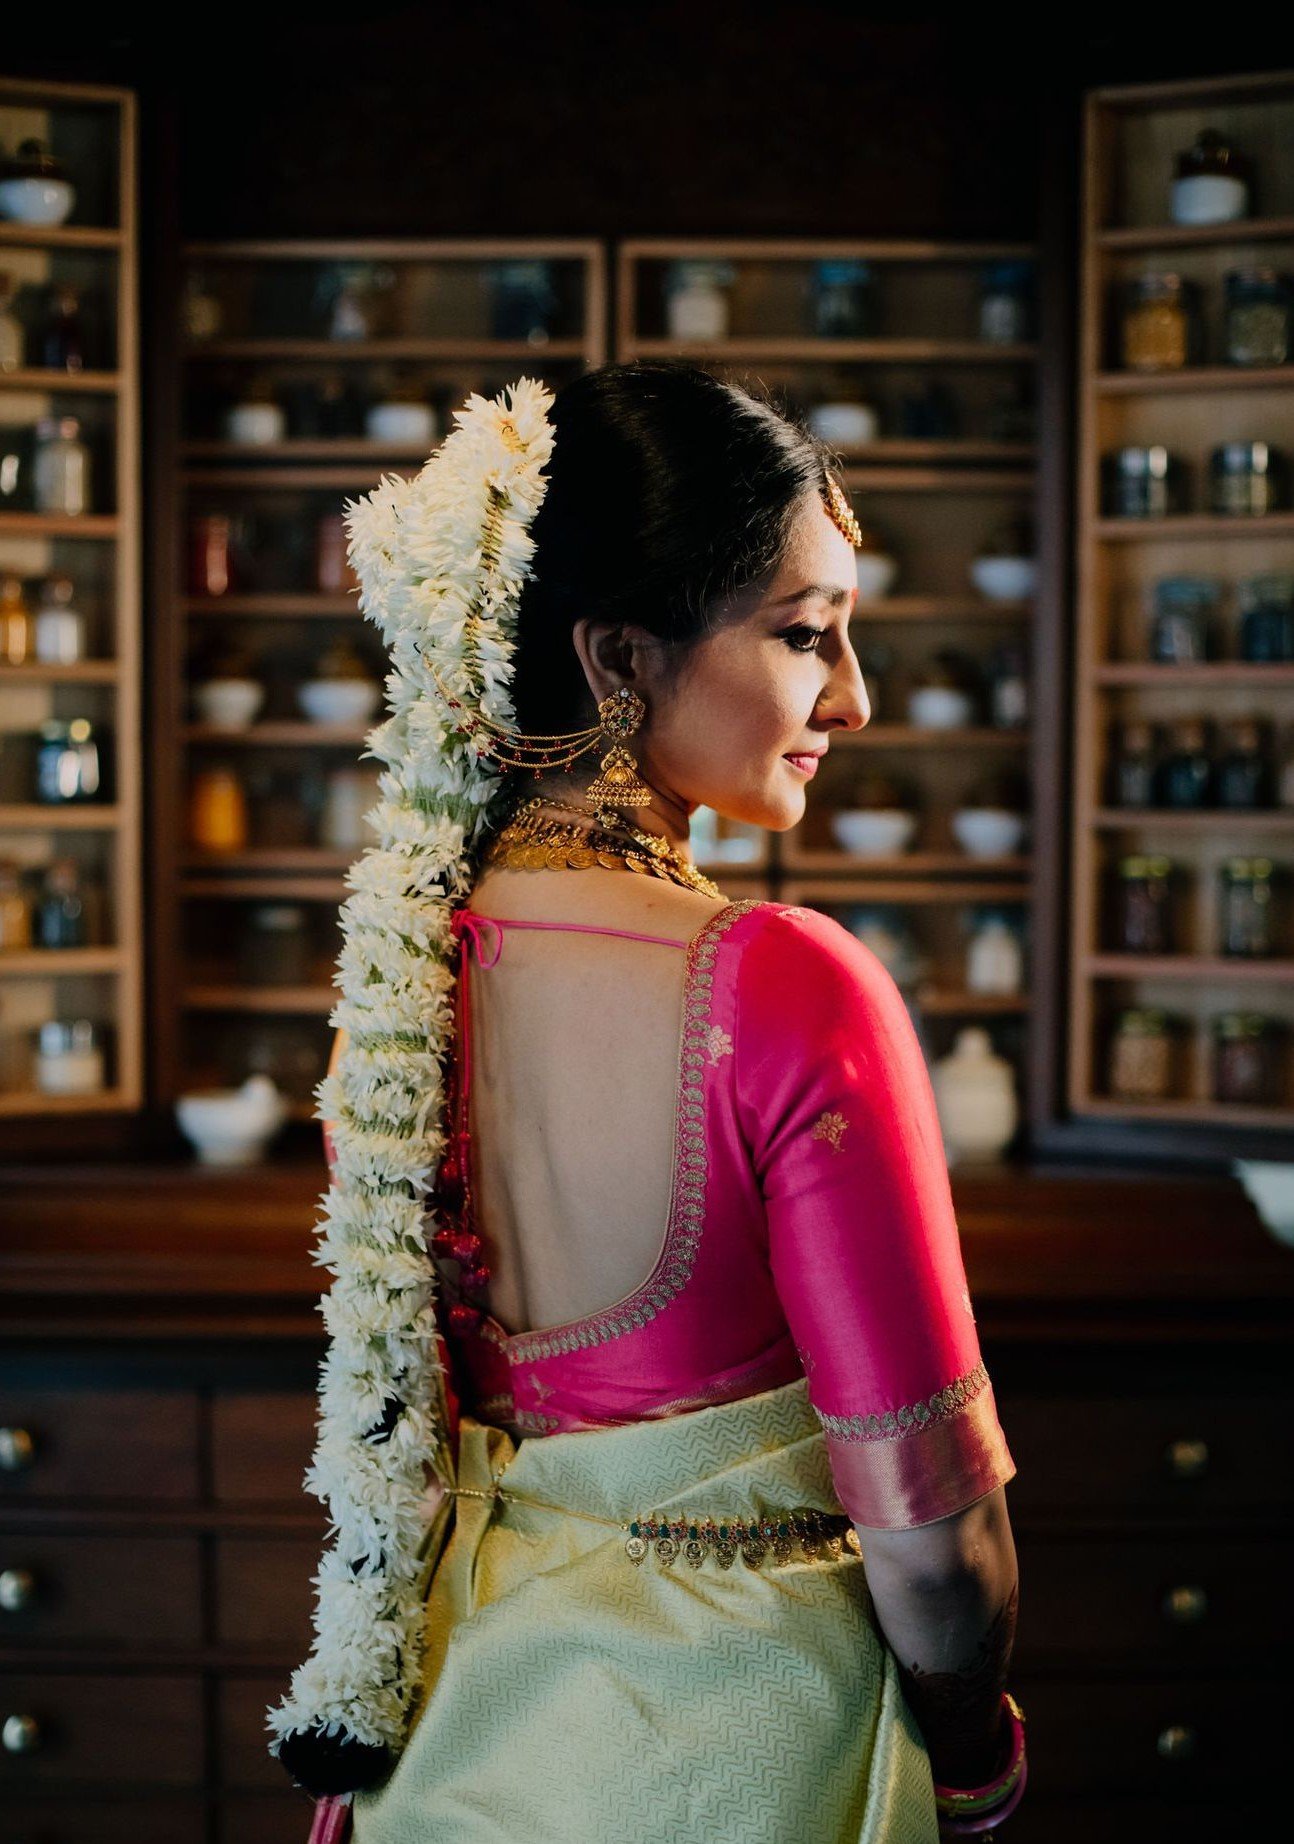 Top 81+ Indian Bridal Hairstyles To Bookmark Right Away! - Wedbook